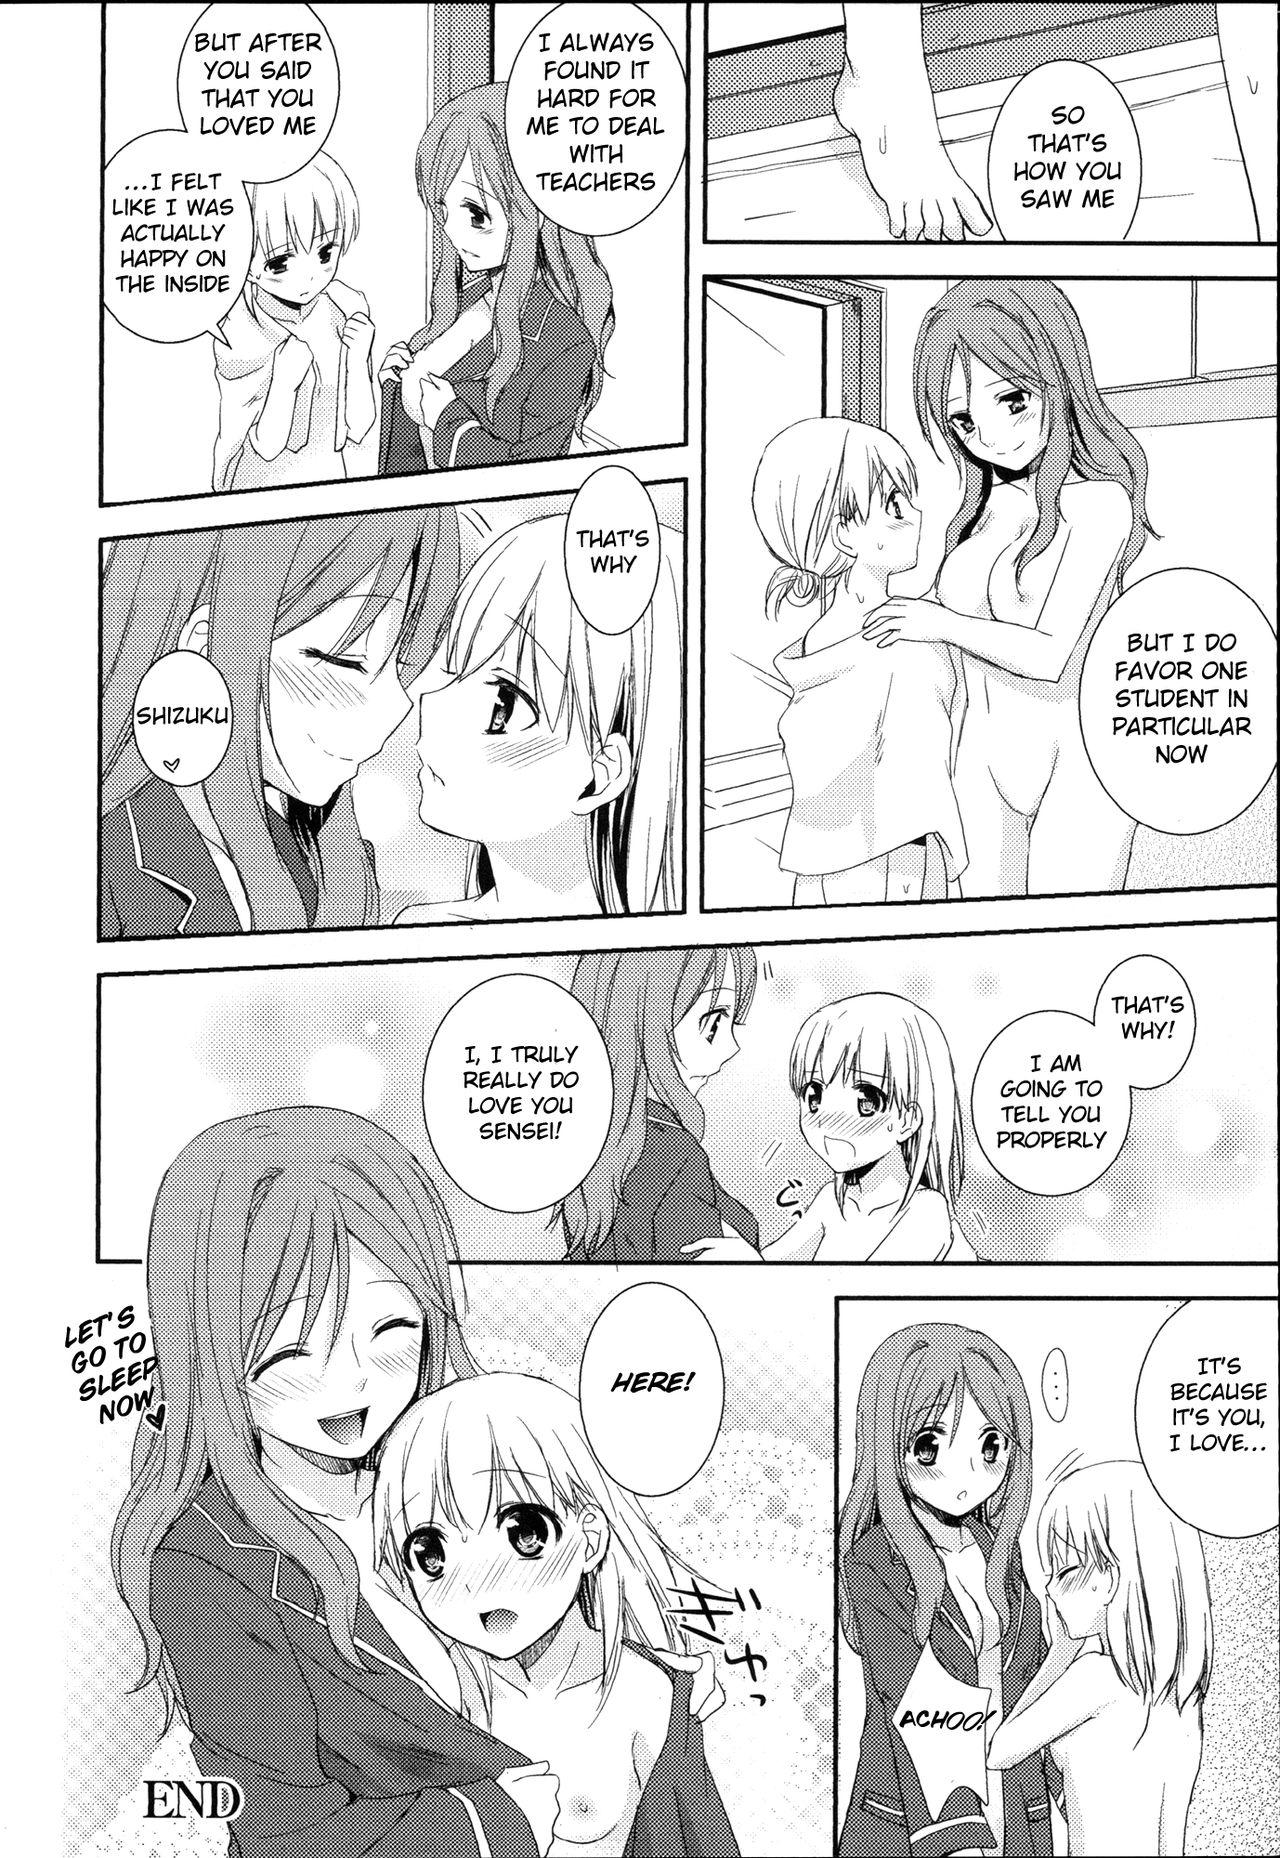 Trimmed I May to U - Original Gay Longhair - Page 20